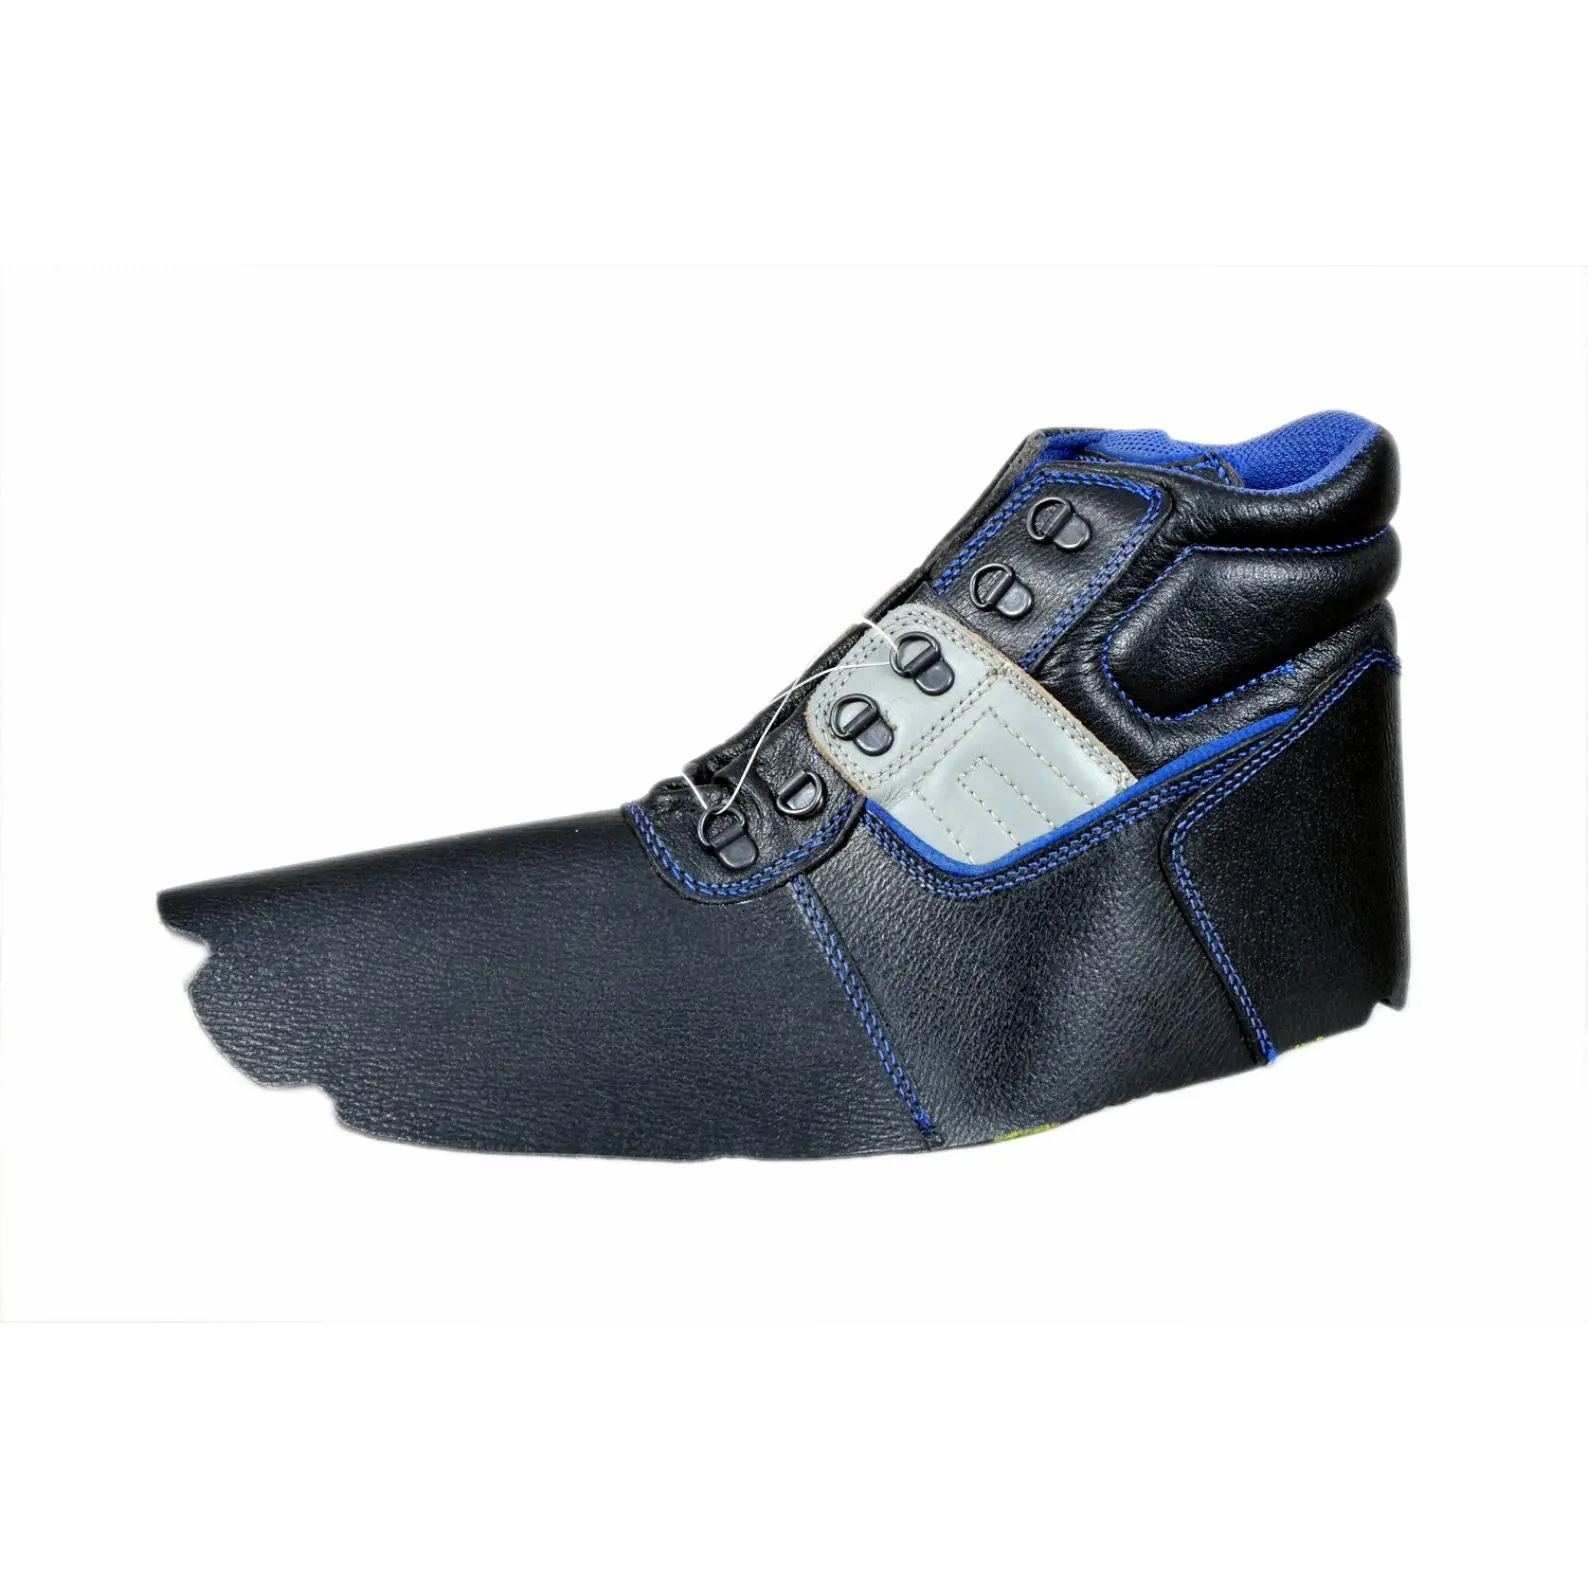 Wholesale Price Factory Supply Dust Leather Shoe Upper with Best Quality for Export Sale from Indian Supplier